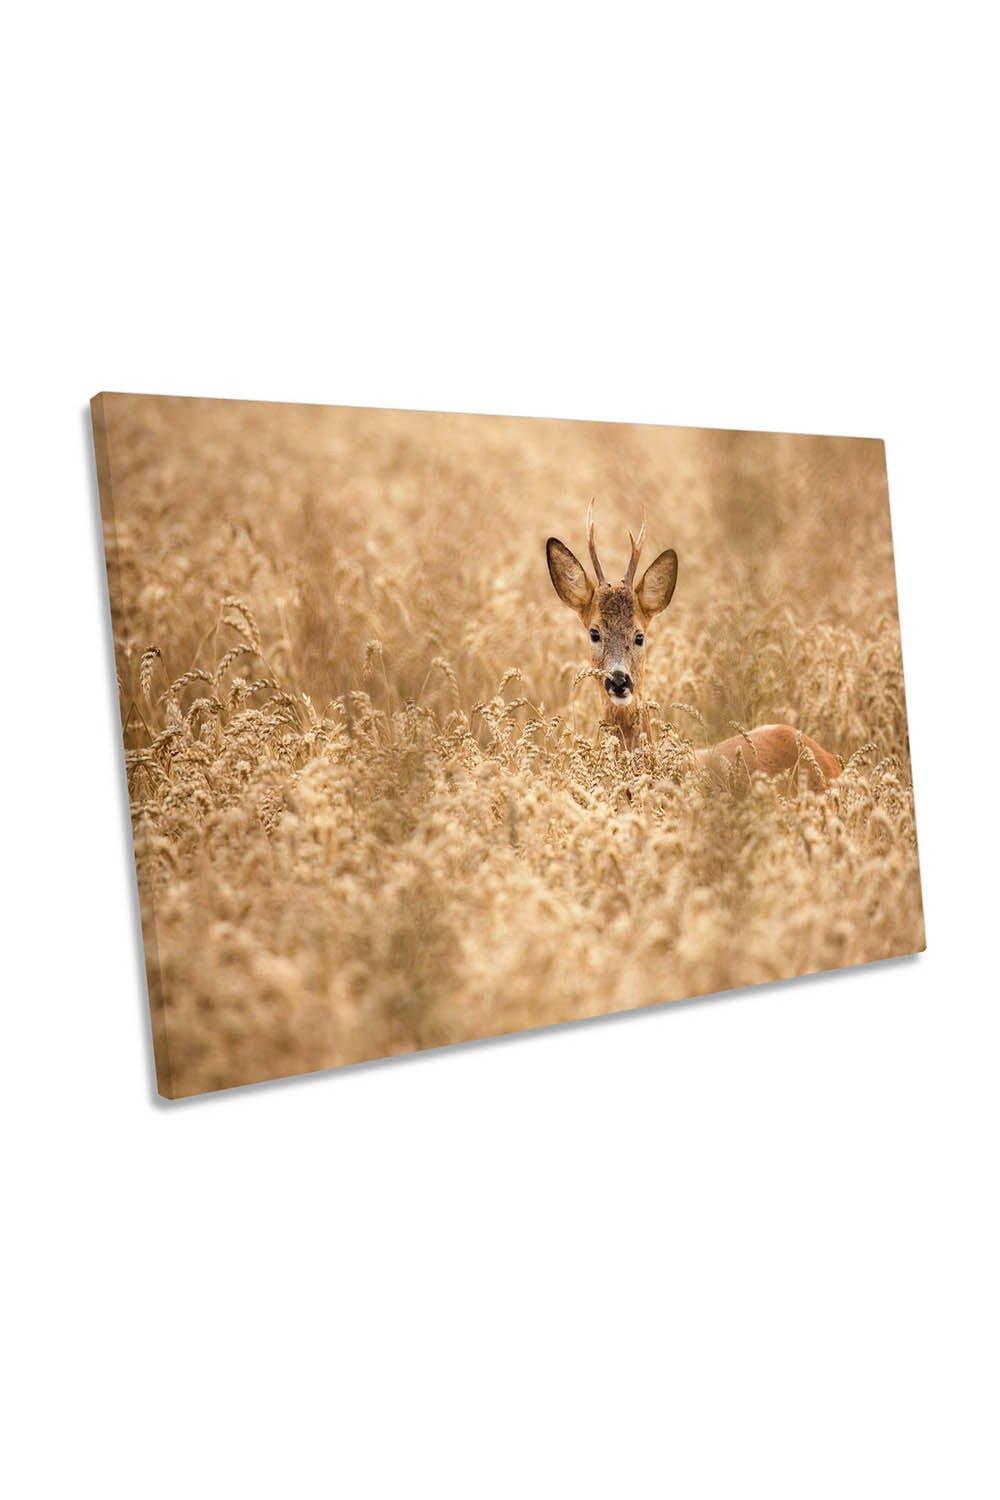 Deer in the Field Wildlife Canvas Wall Art Picture Print